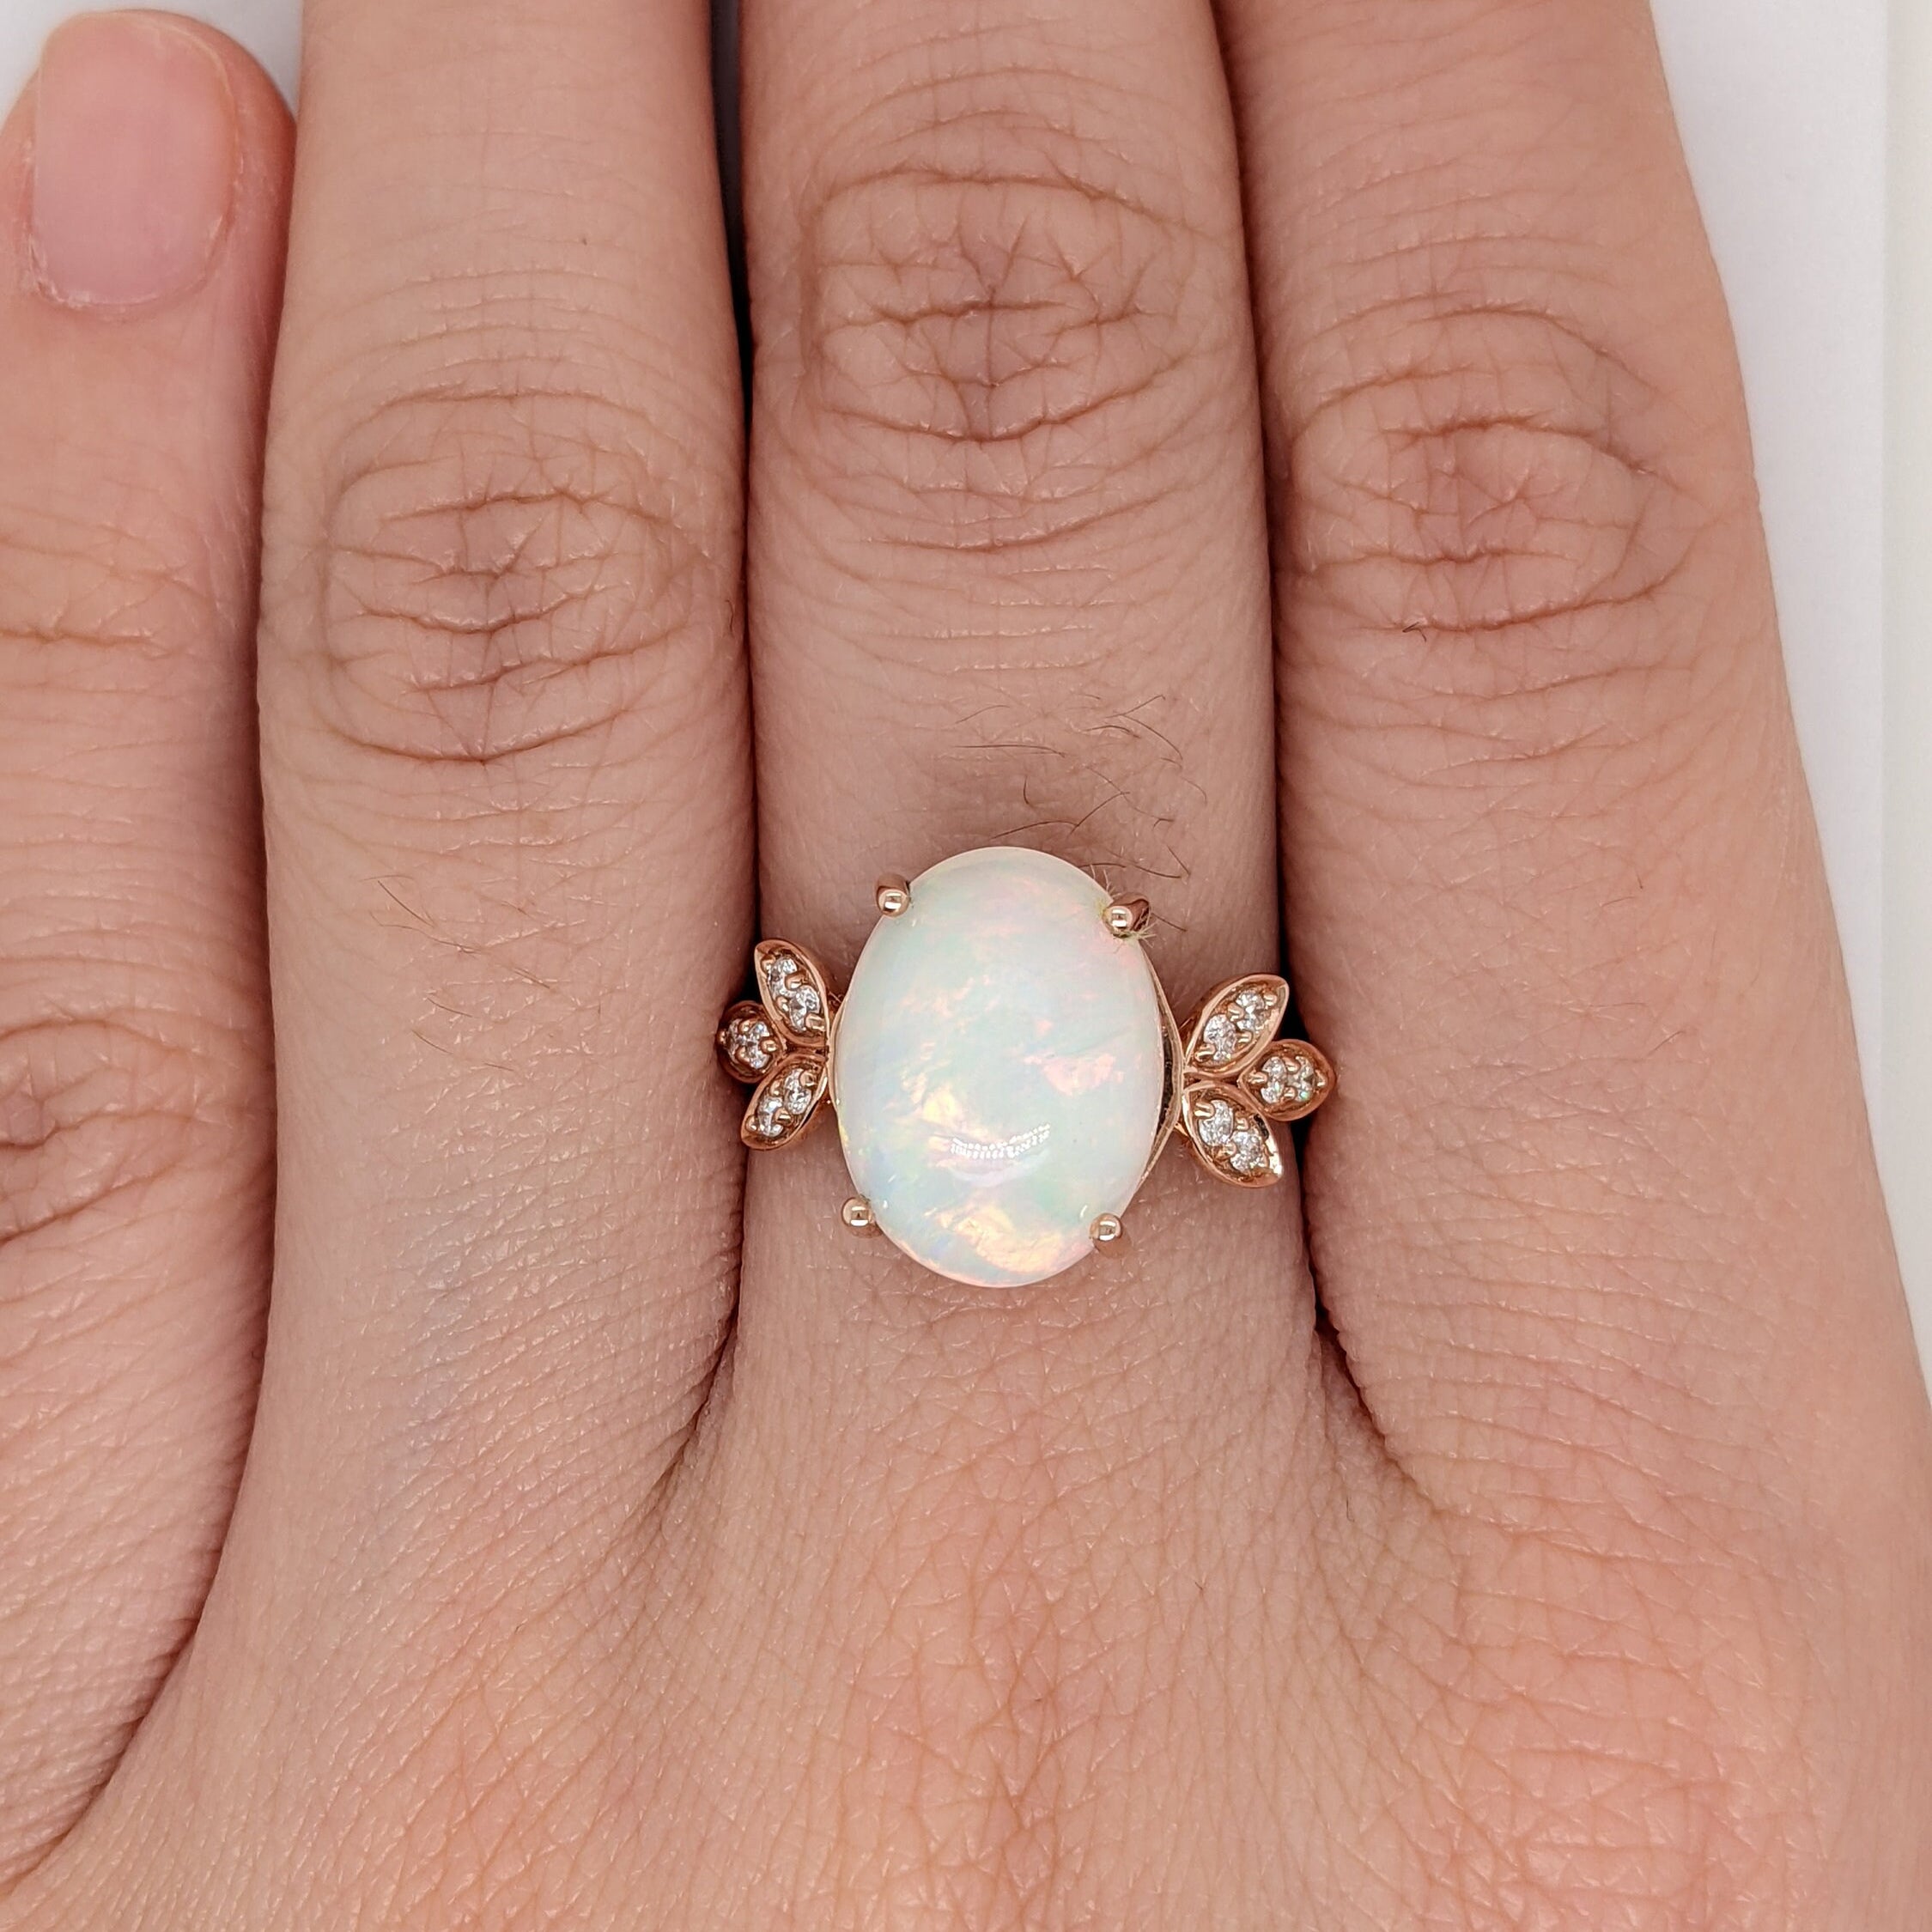 Statement Rings-Statement Ethiopian Opal Ring with Diamond Accents in Solid 14k Rose Gold | Oval 14x10mm | Gemstone Jewelry | October Birthstone | Statement - NNJGemstones